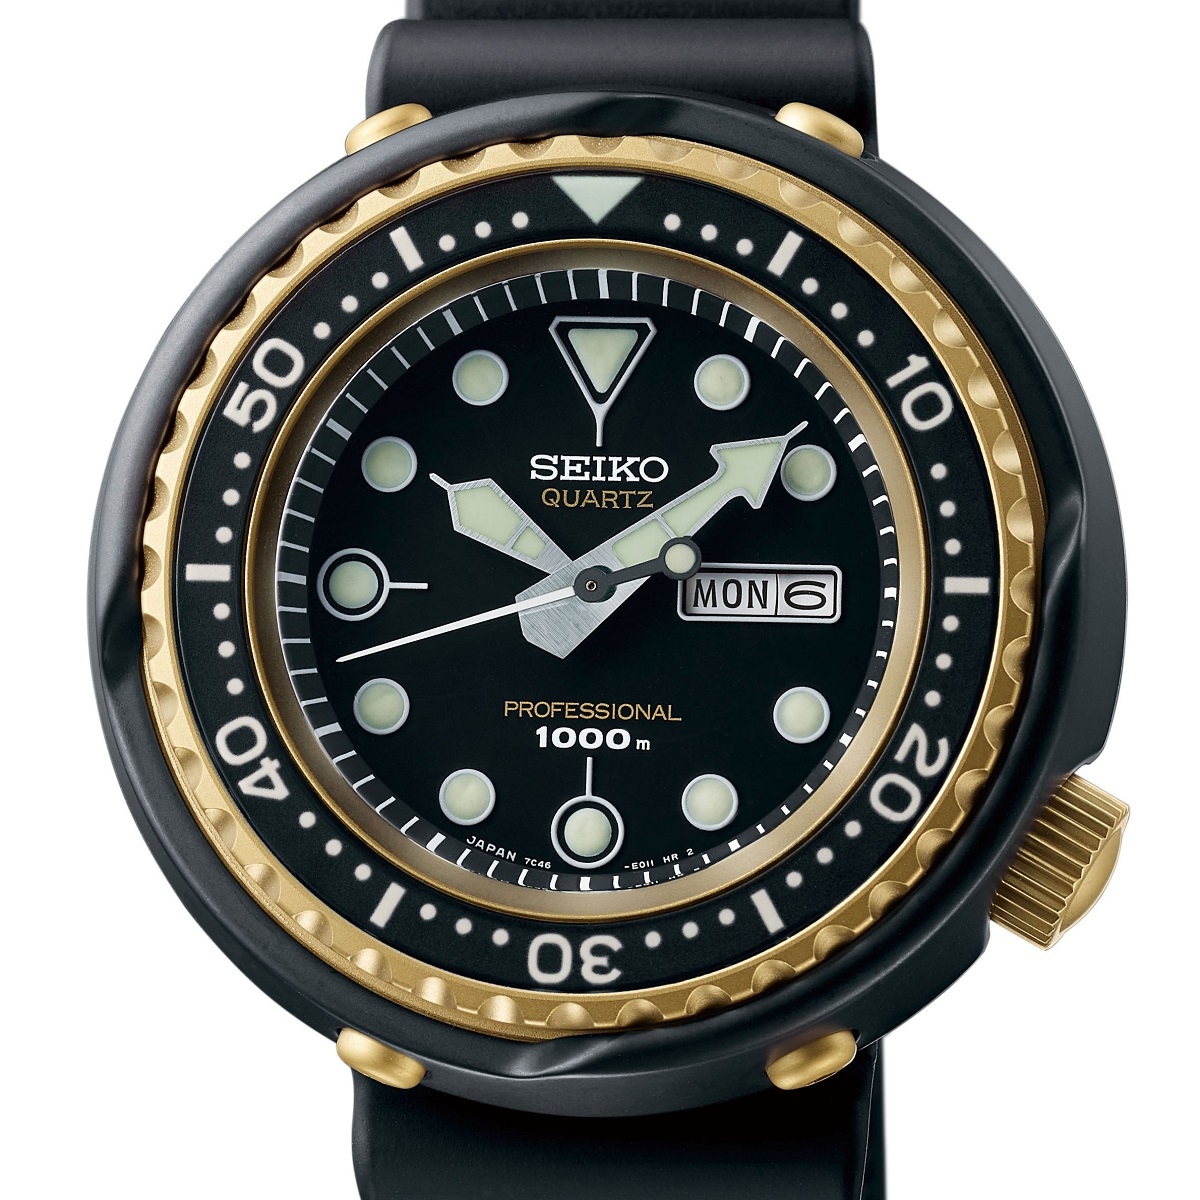 Seiko Prospex S23626 1000M Limited Edition Dive Watch | aBlogtoWatch